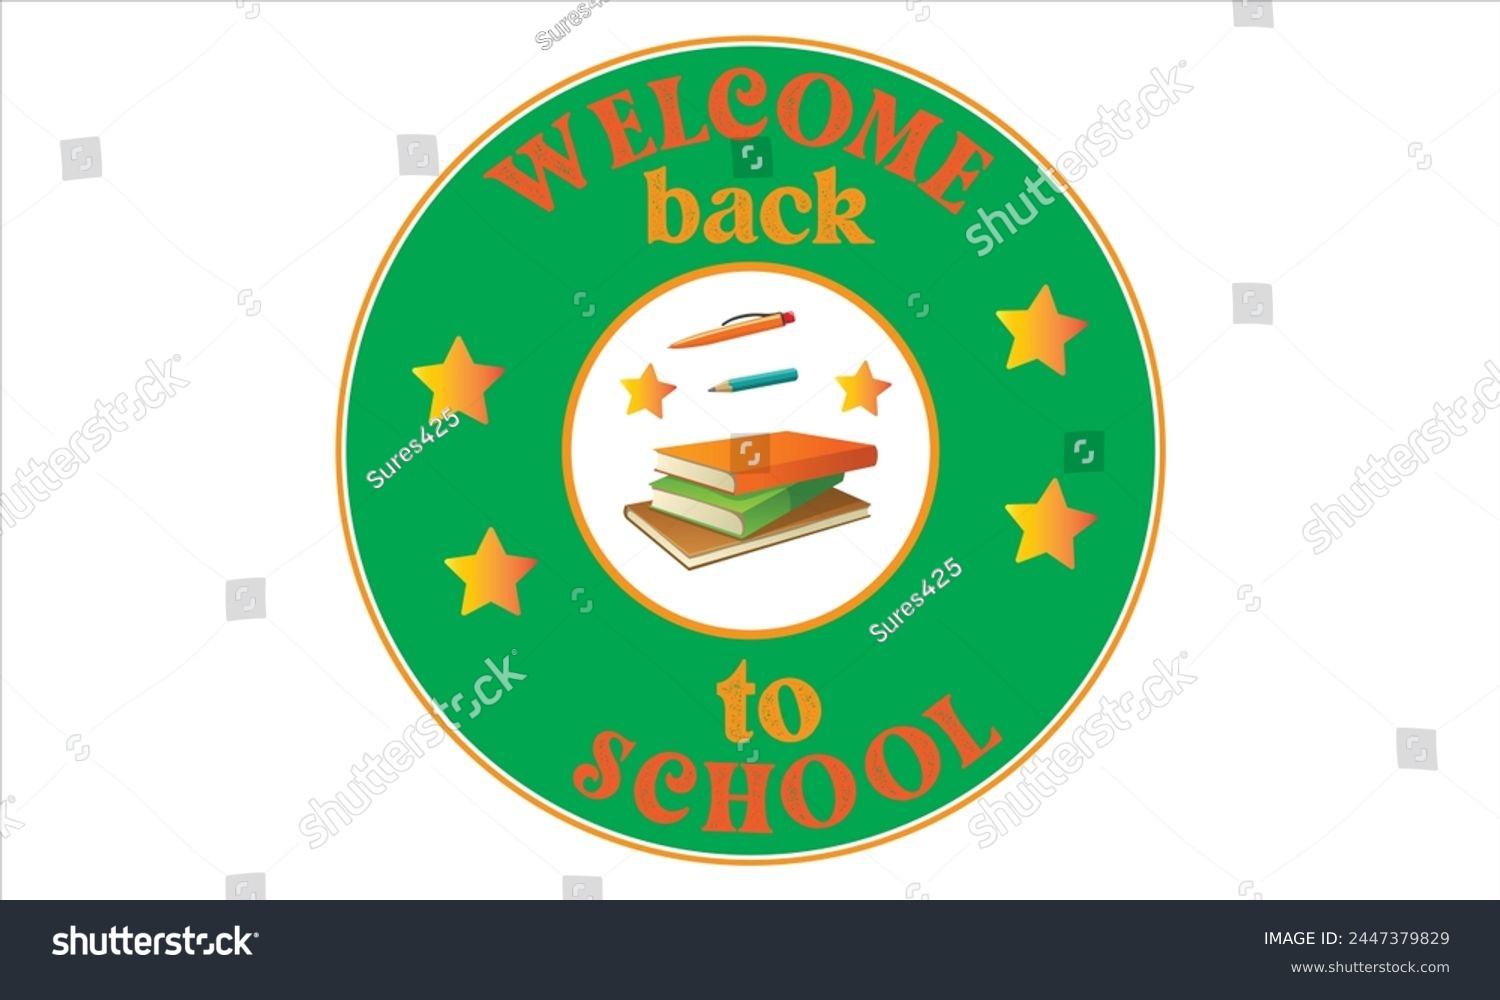 SVG of Back To School Shirt Svg,Teacher Gift Svg,First Day Of School Svg,Kids Back To School T shirt,Gaming School T shirt,100 Days Saying,Svg Cut File,Retro Groovy T shirt,Commercial Use svg